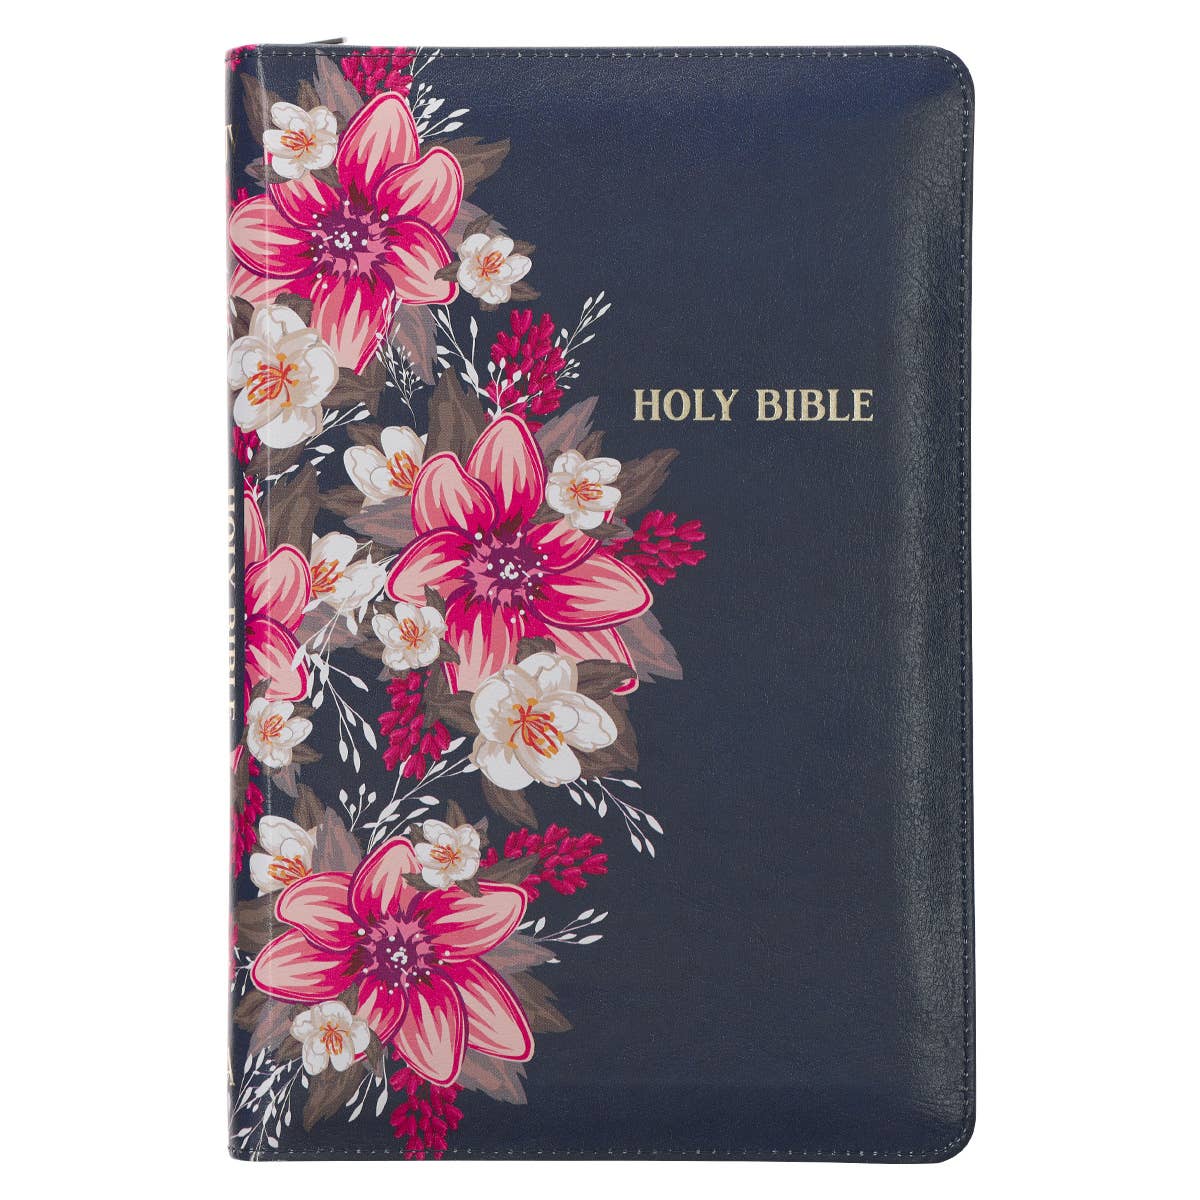 Floral Blue Faux Leather King James Version Deluxe Gift Bible with Thumb Index and Zippered Closure